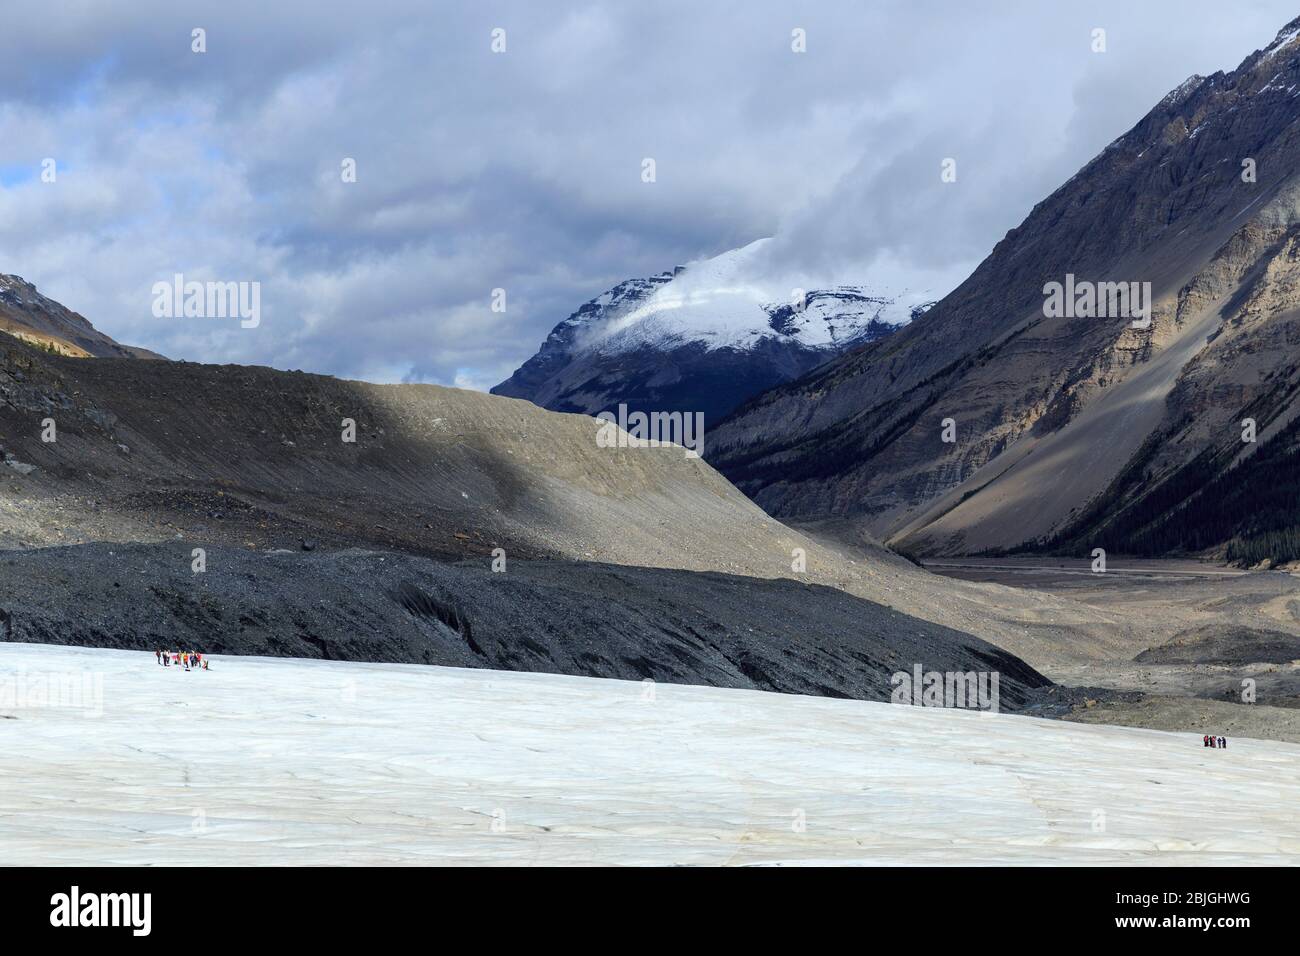 Distant hikers on Athabasca Glacier of Columbia Ice Field in Alberta, Canada Stock Photo